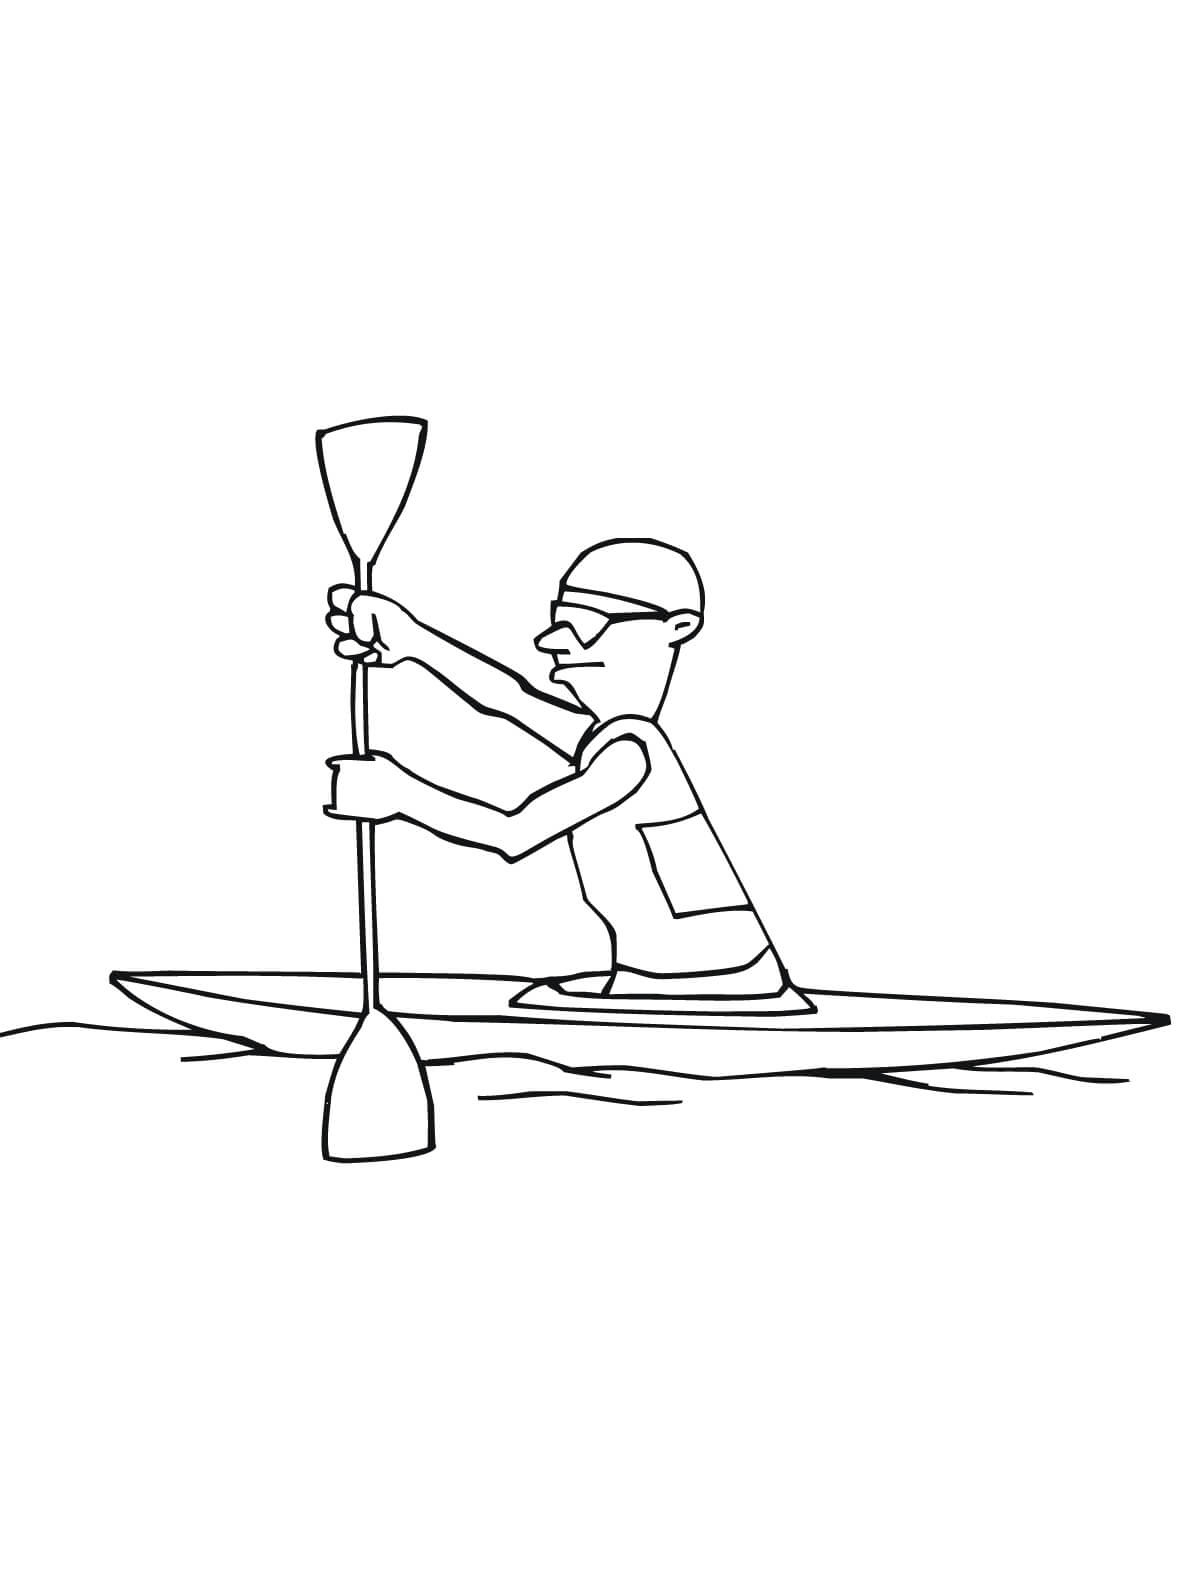 kayak coloring pages to print